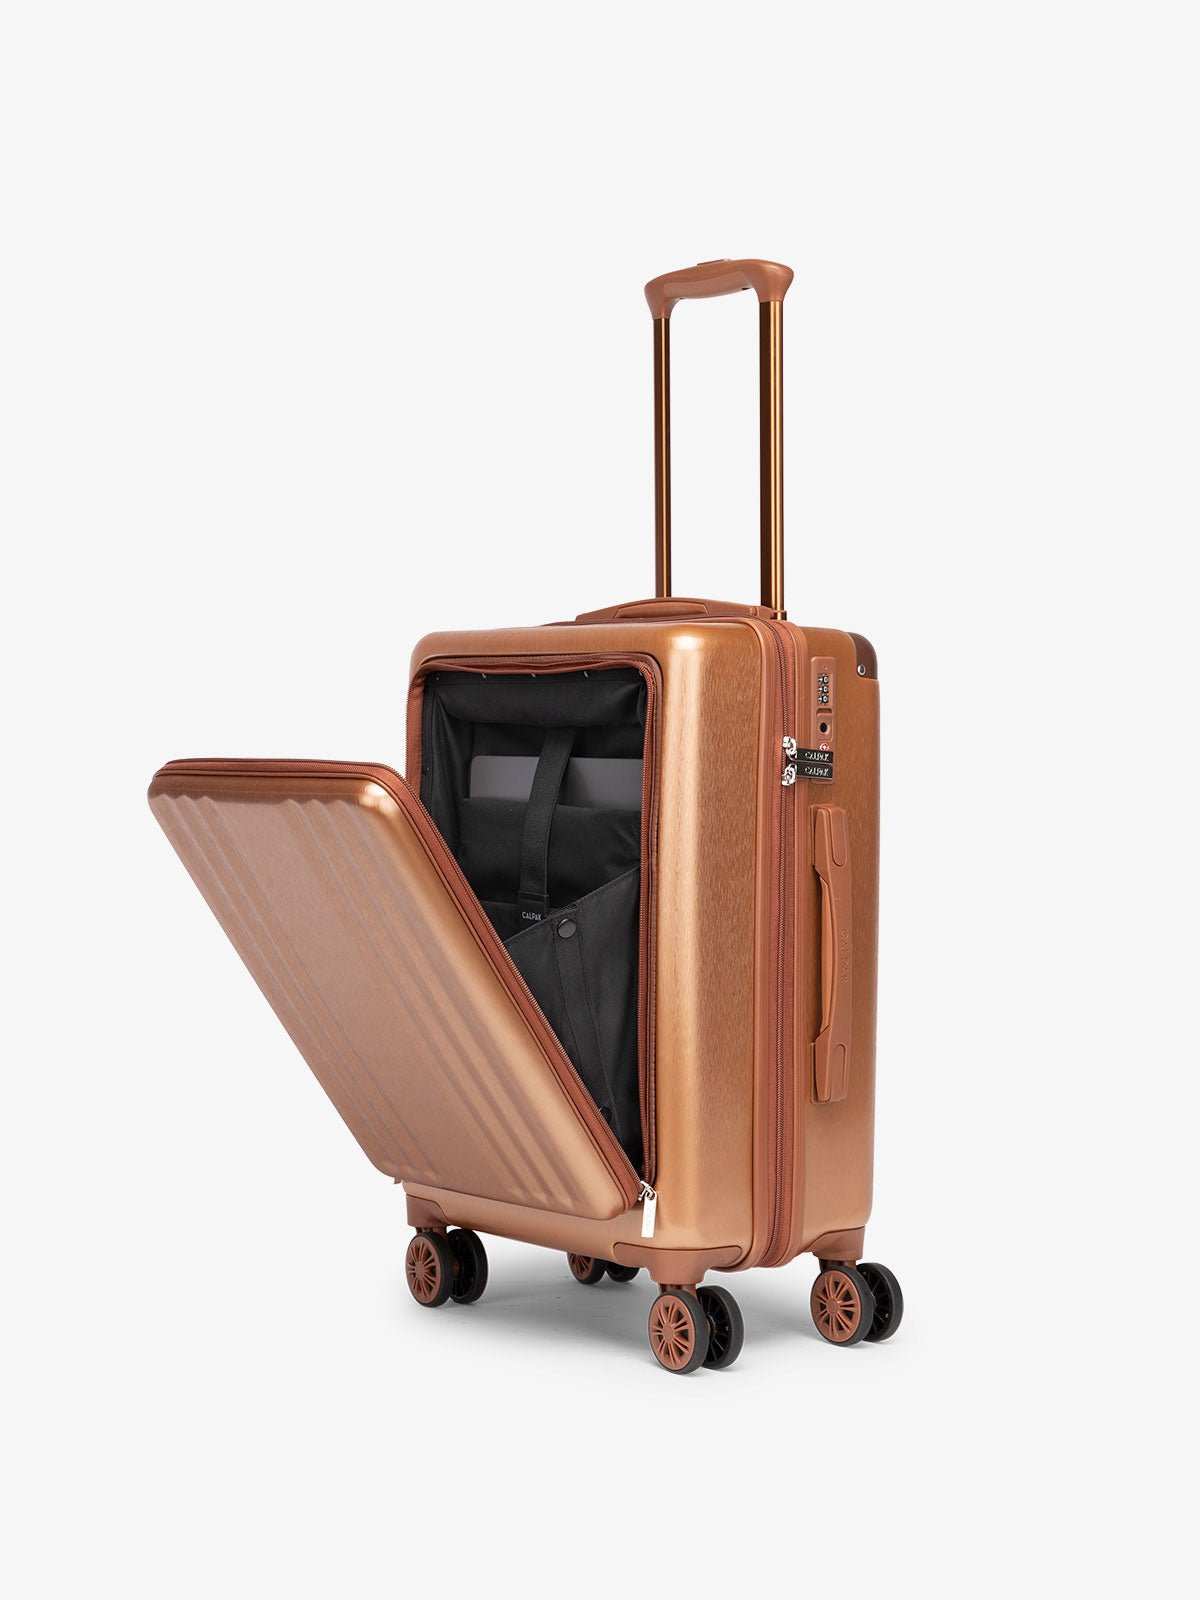 CALPAK Ambeur front pocket lightweight carry-on luggage in copper